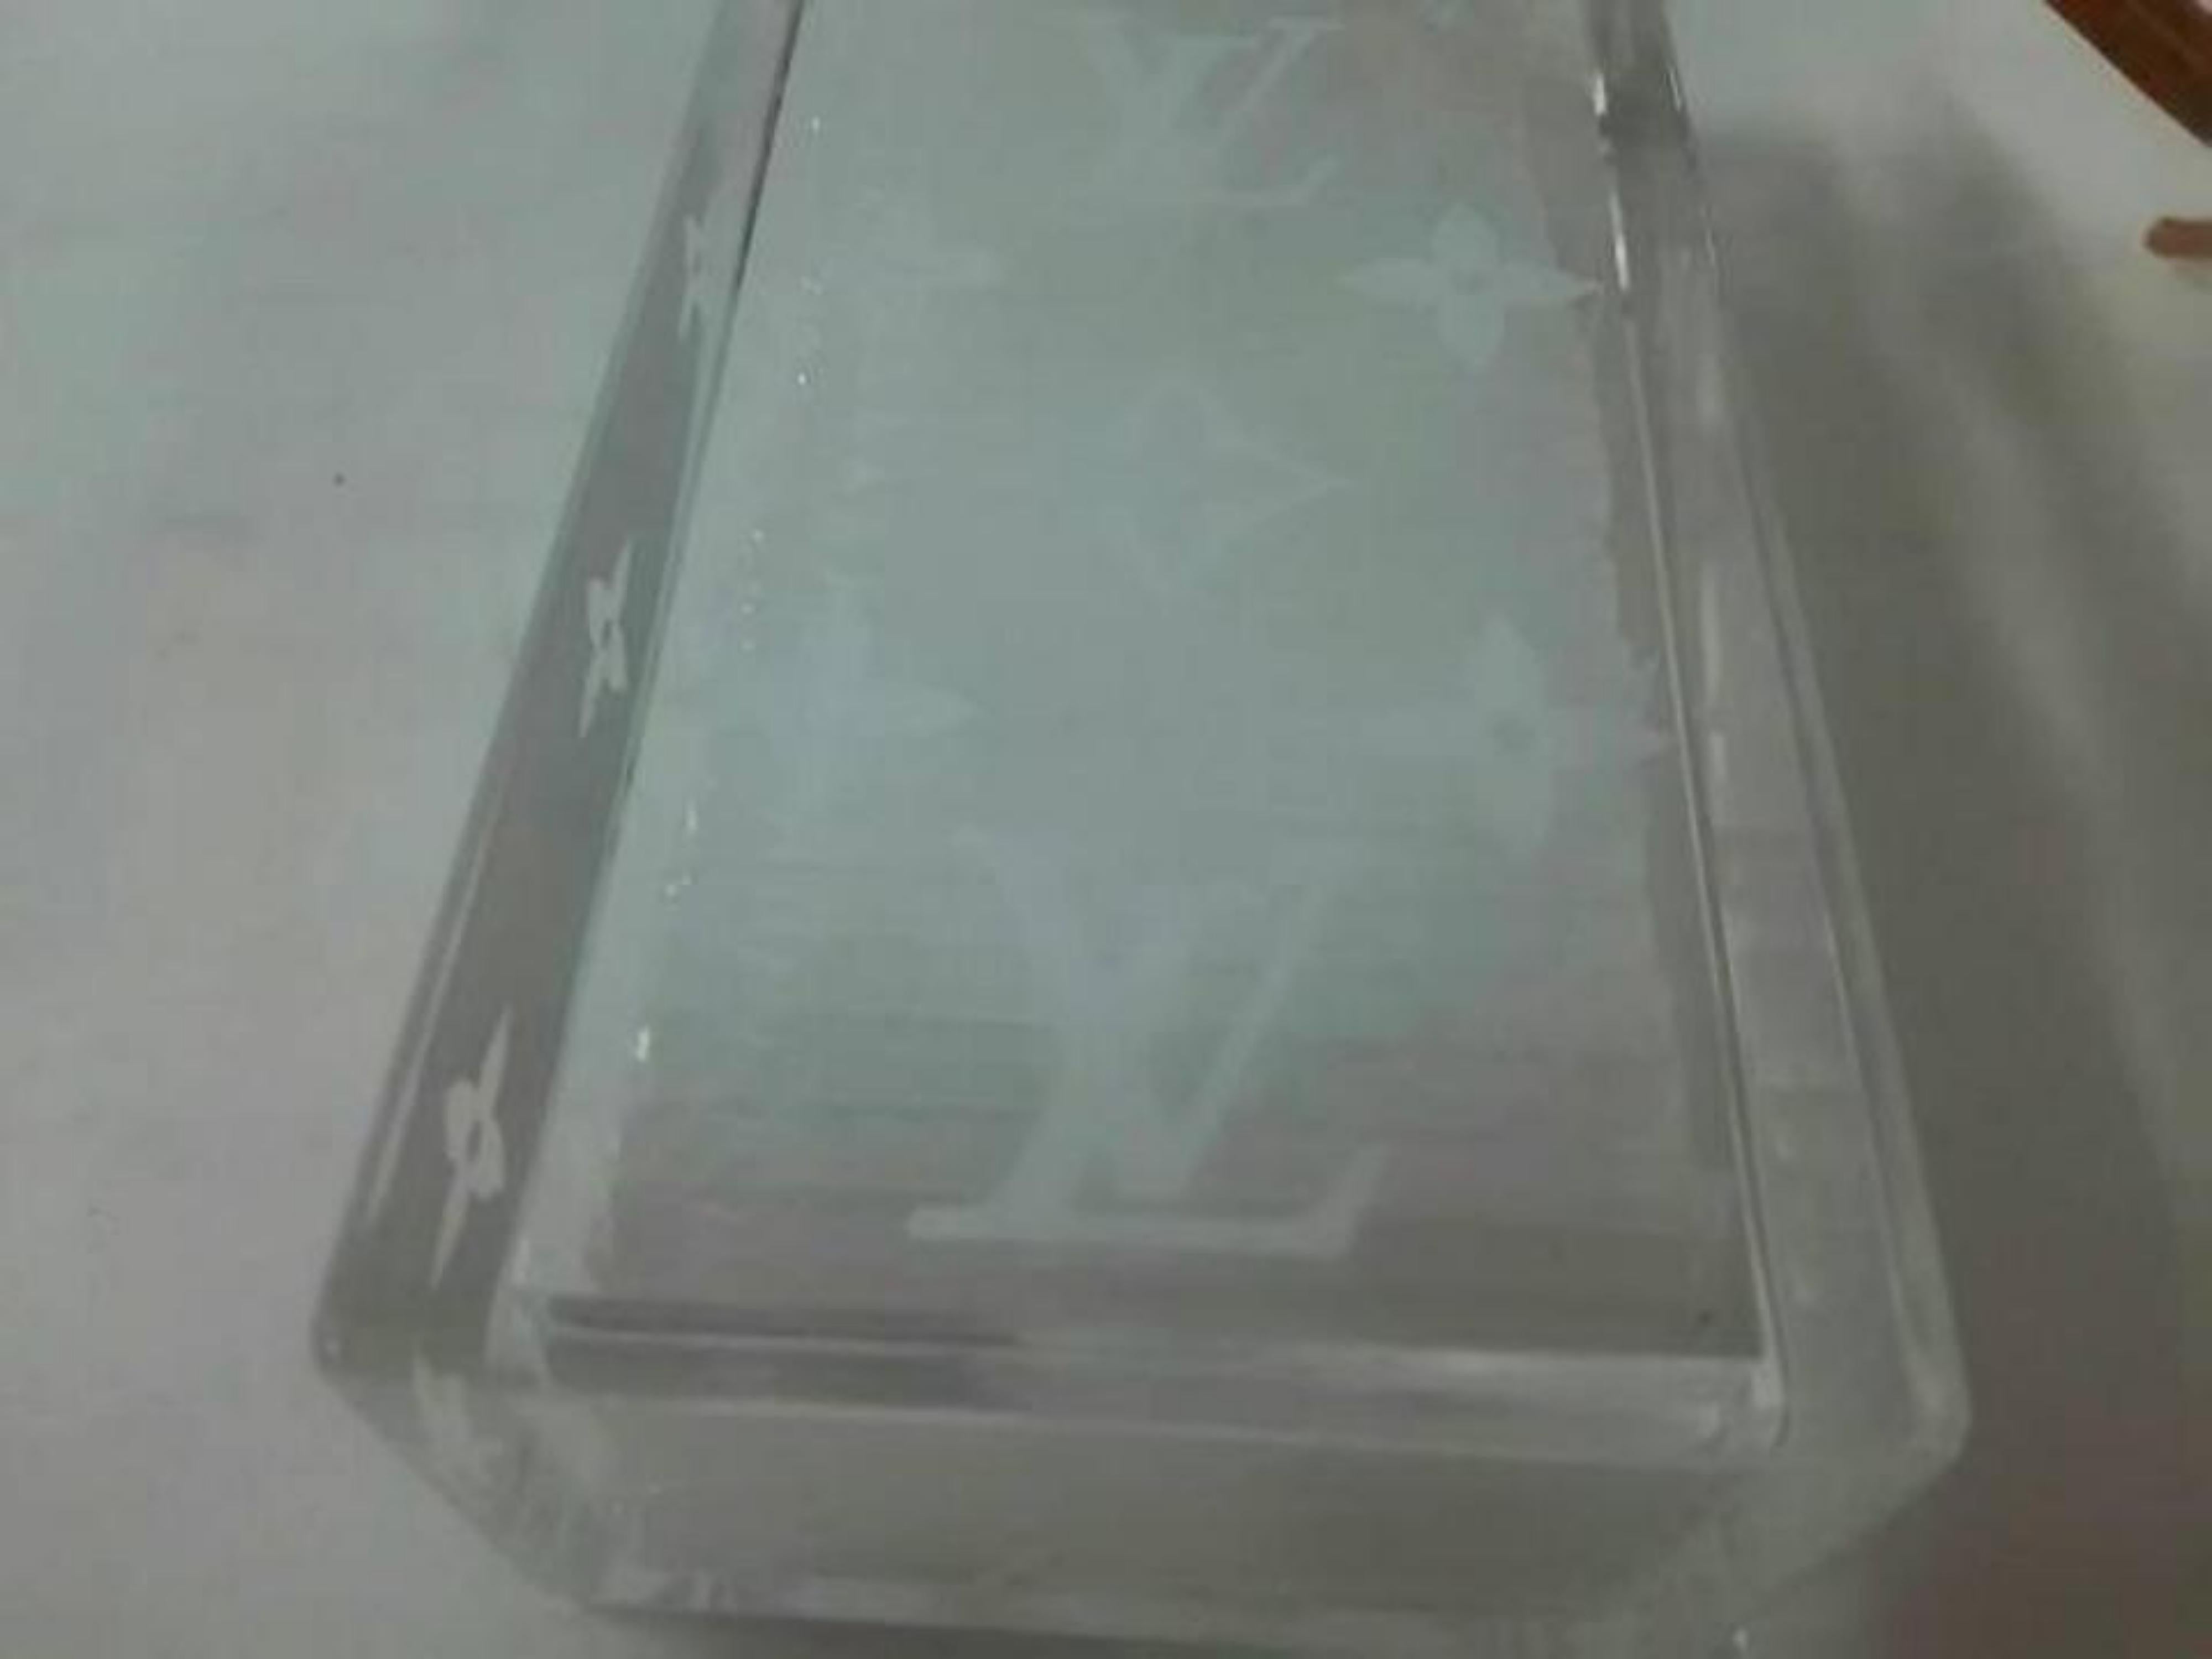 Louis Vuitton Clear (Ultra Rare) Monogram Dominoes Case with Domino Set 234035 For Sale 4